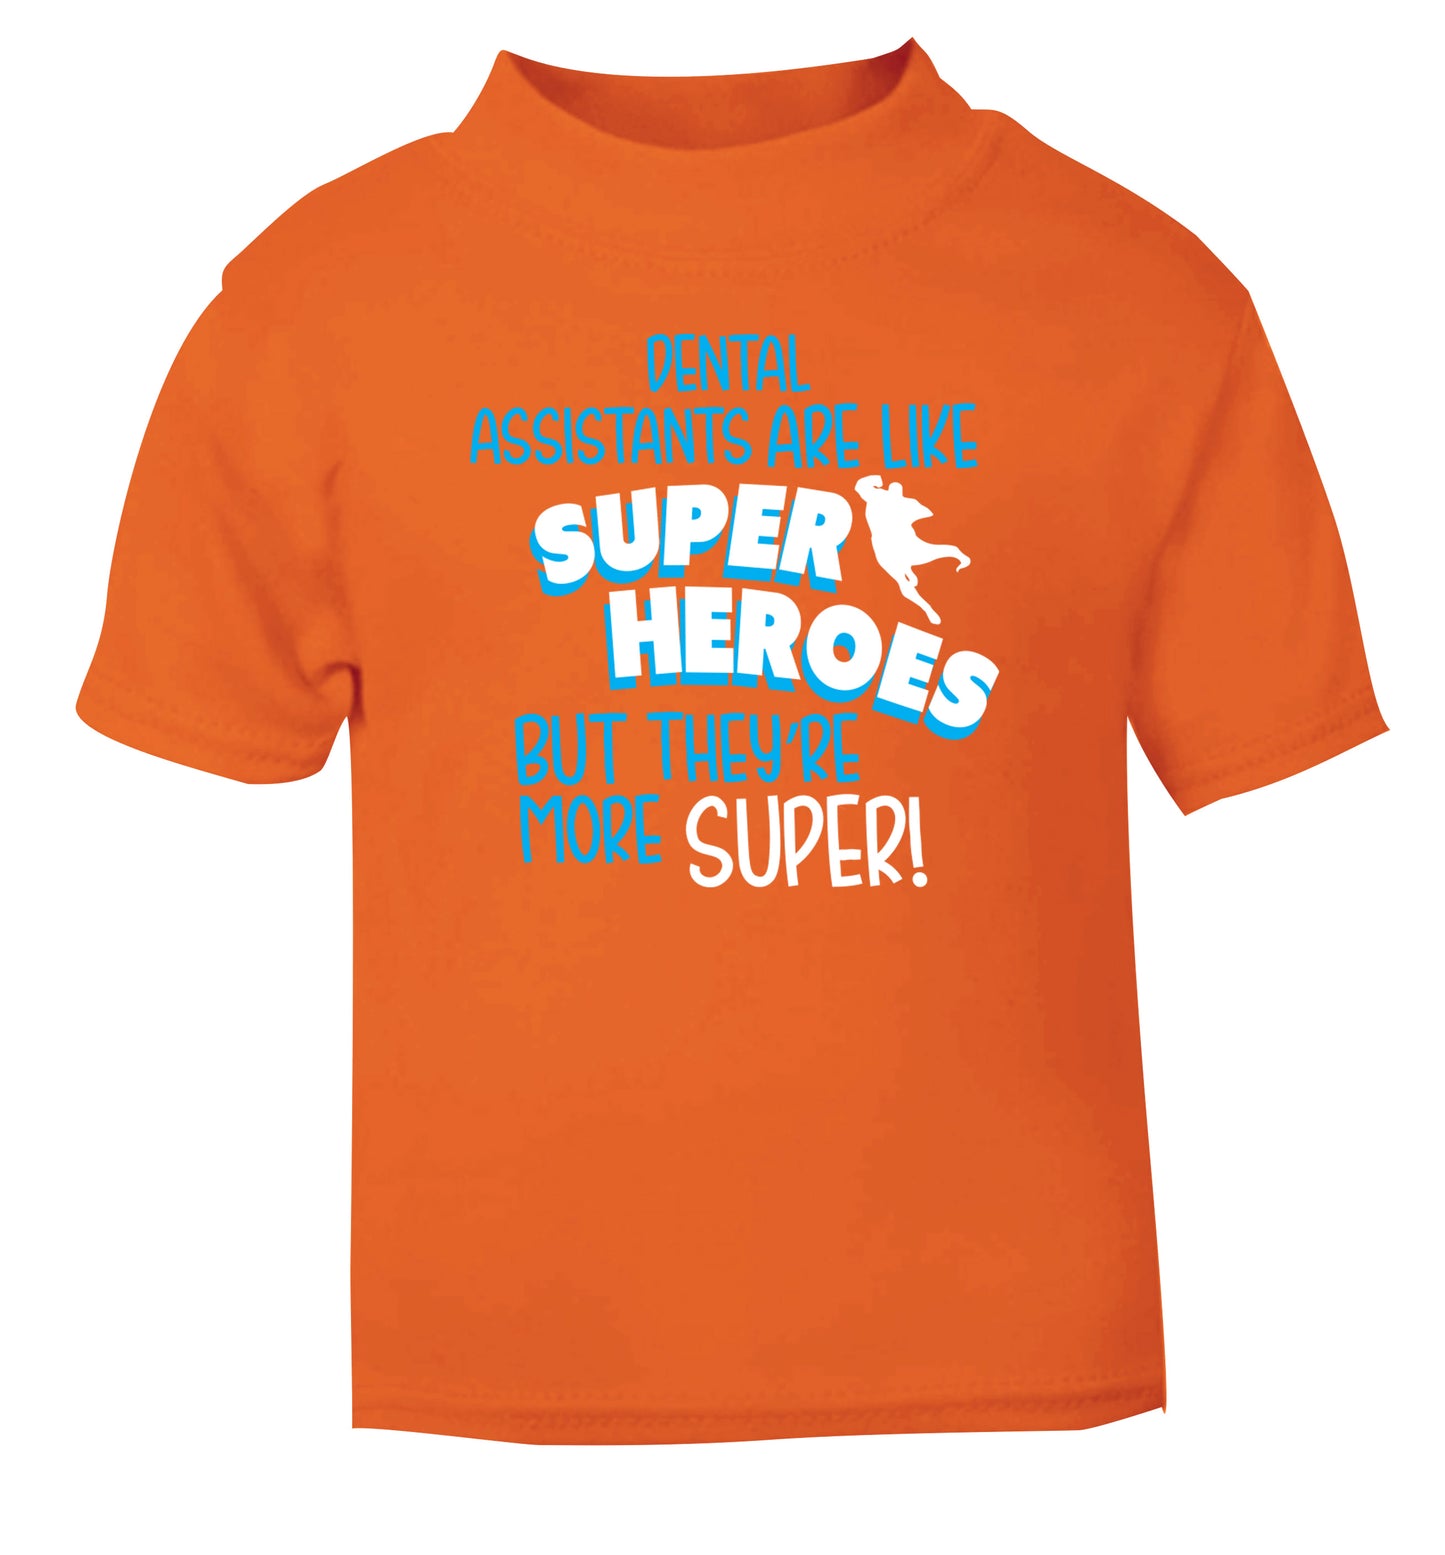 Dental Assistants are like superheros but they're more super orange Baby Toddler Tshirt 2 Years